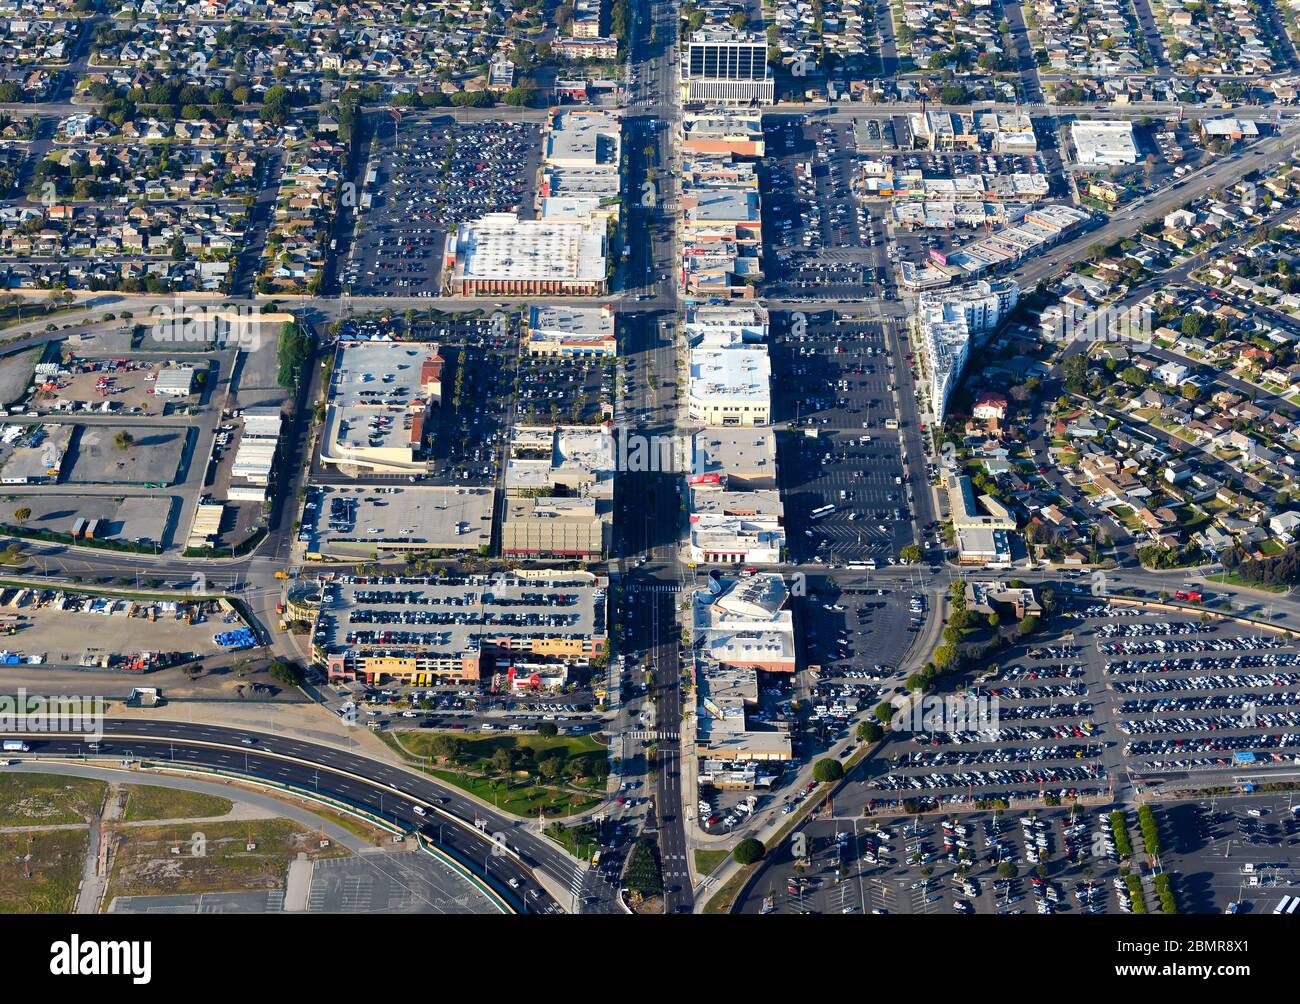 Aerial view of S Sepulveda Boulevard near LAX Airport. Multiple parking lots and residential houses in Westchester. High view of South Sepulveda Blvd. Stock Photo